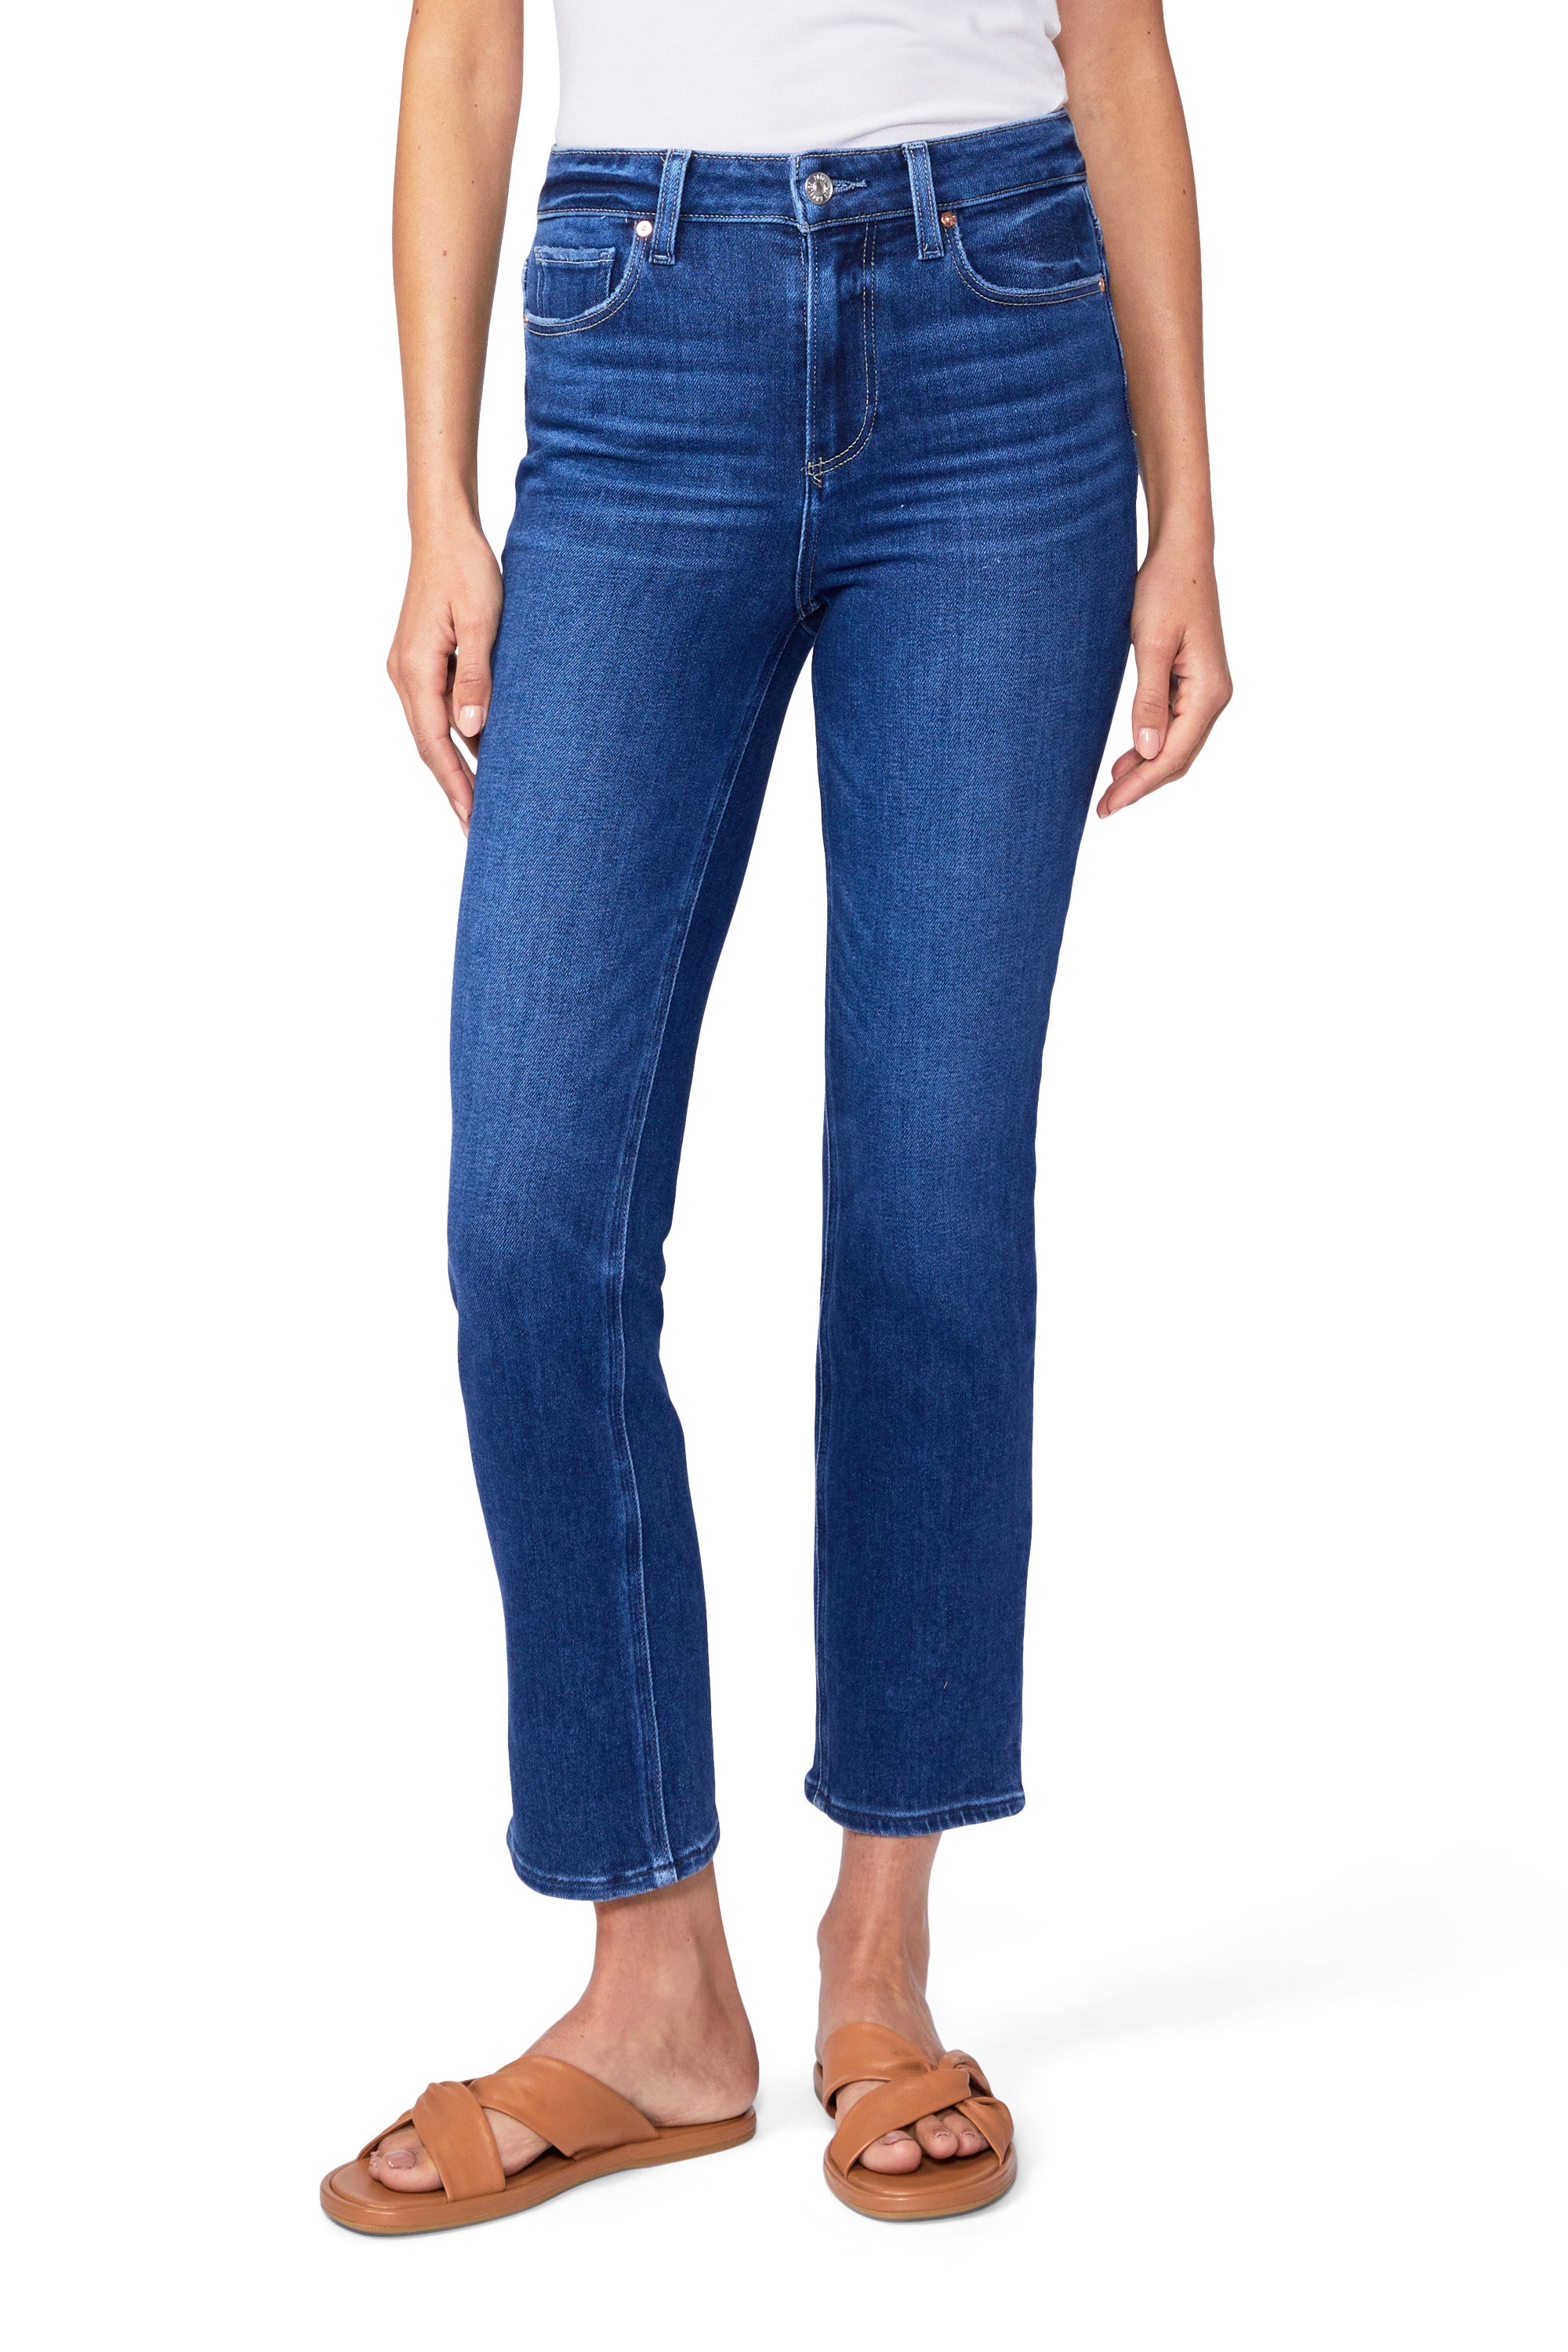 A woman is wearing a pair of Paige Cindy Straight Ankle - Soleil jeans.